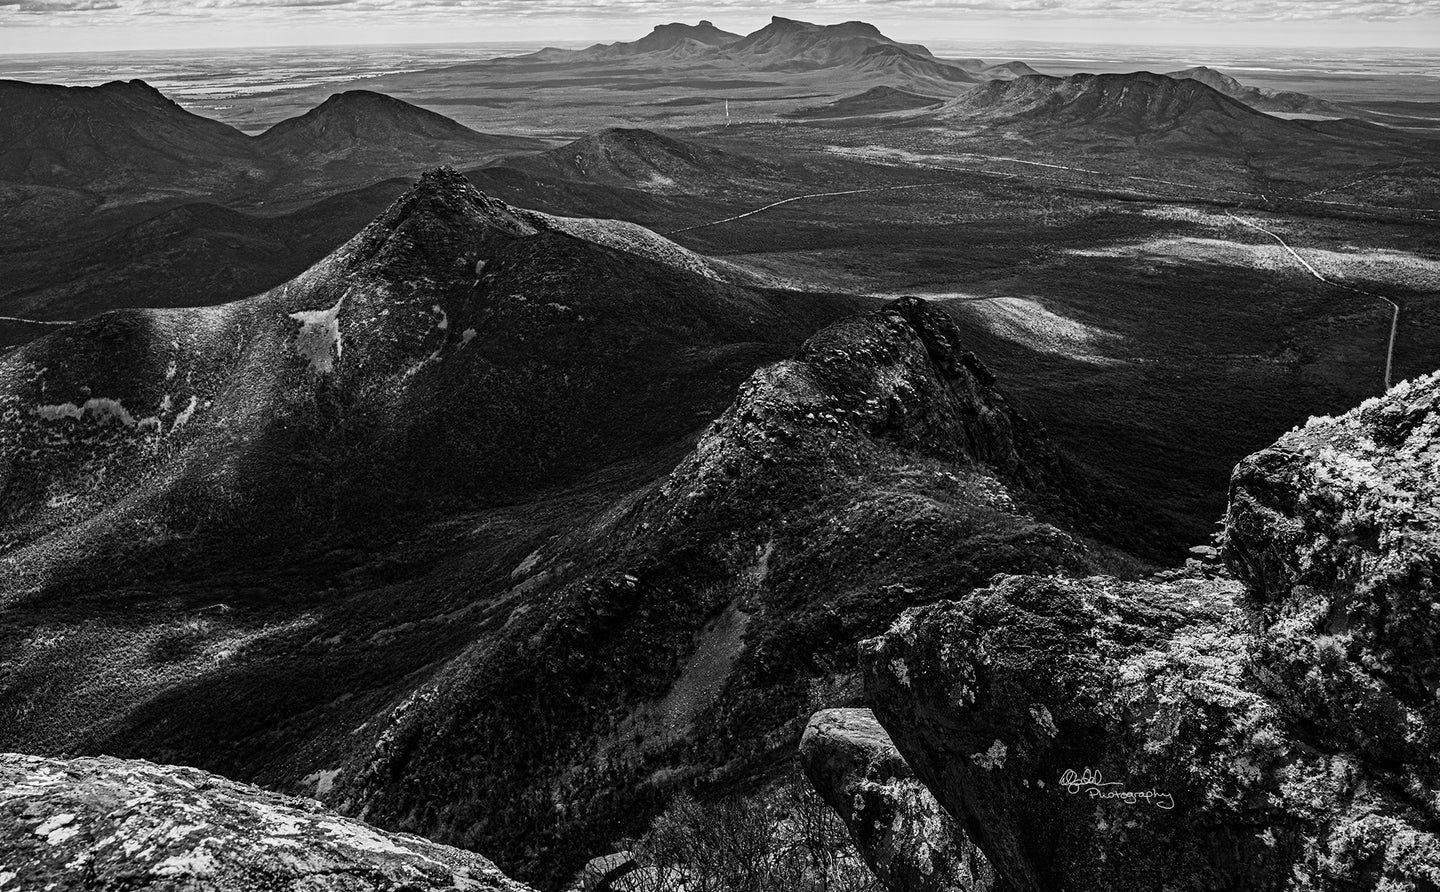 The Stirling Ranges - Views from Mount Toolbranup